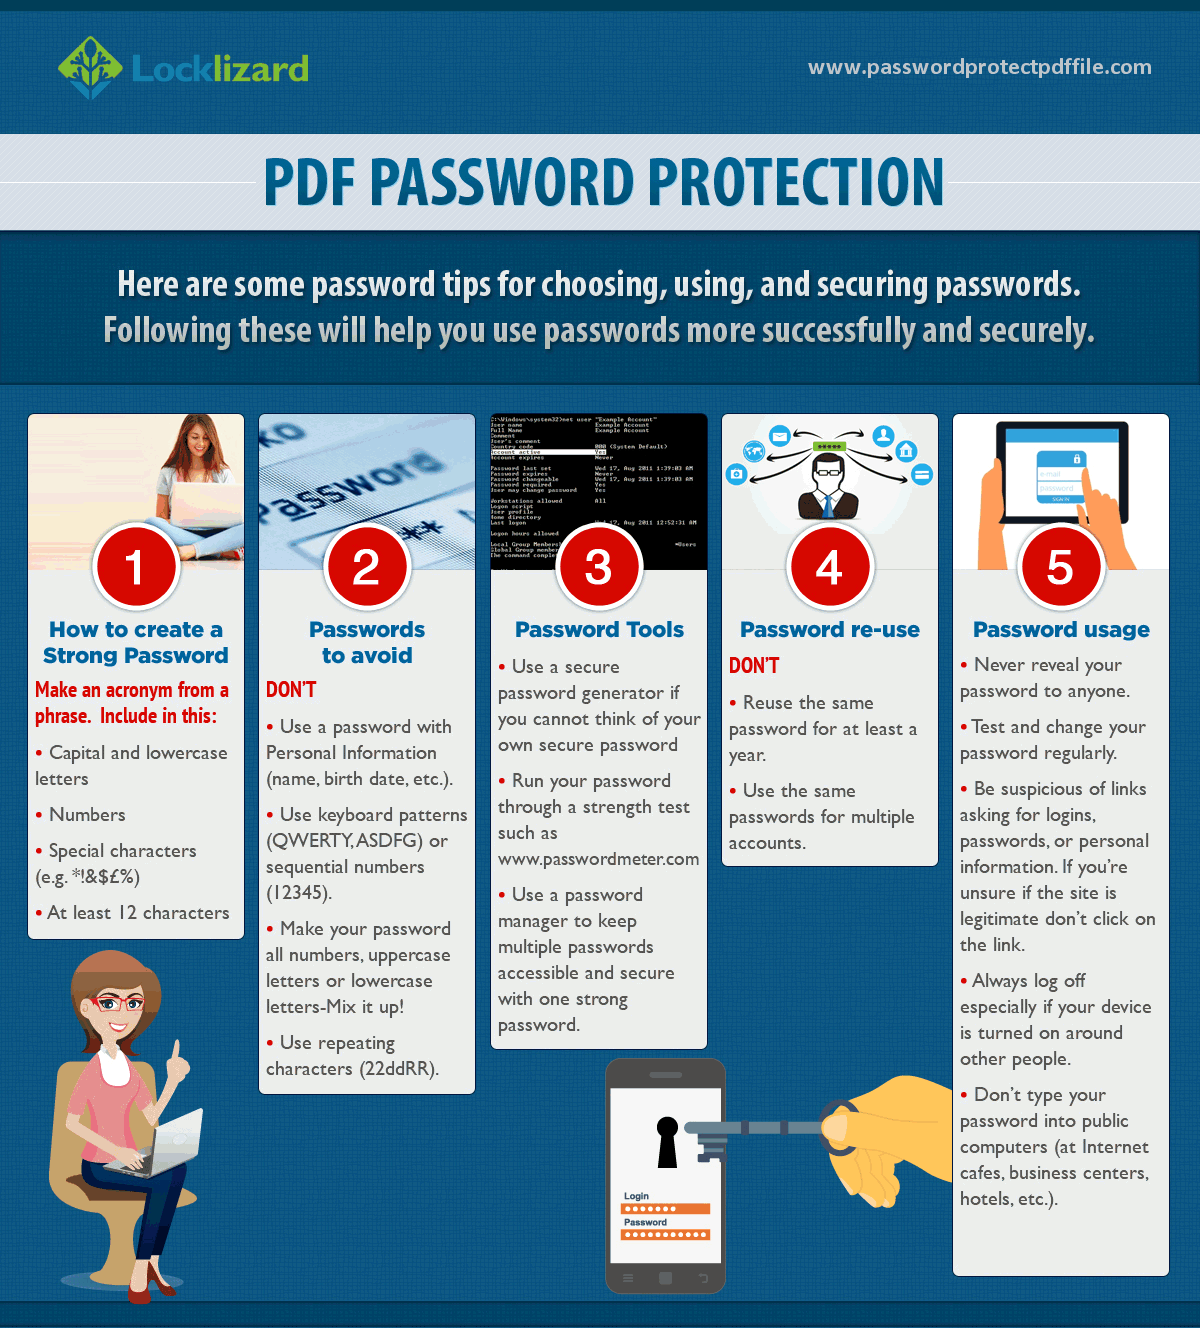 PDF Password Protection Tips Infographic